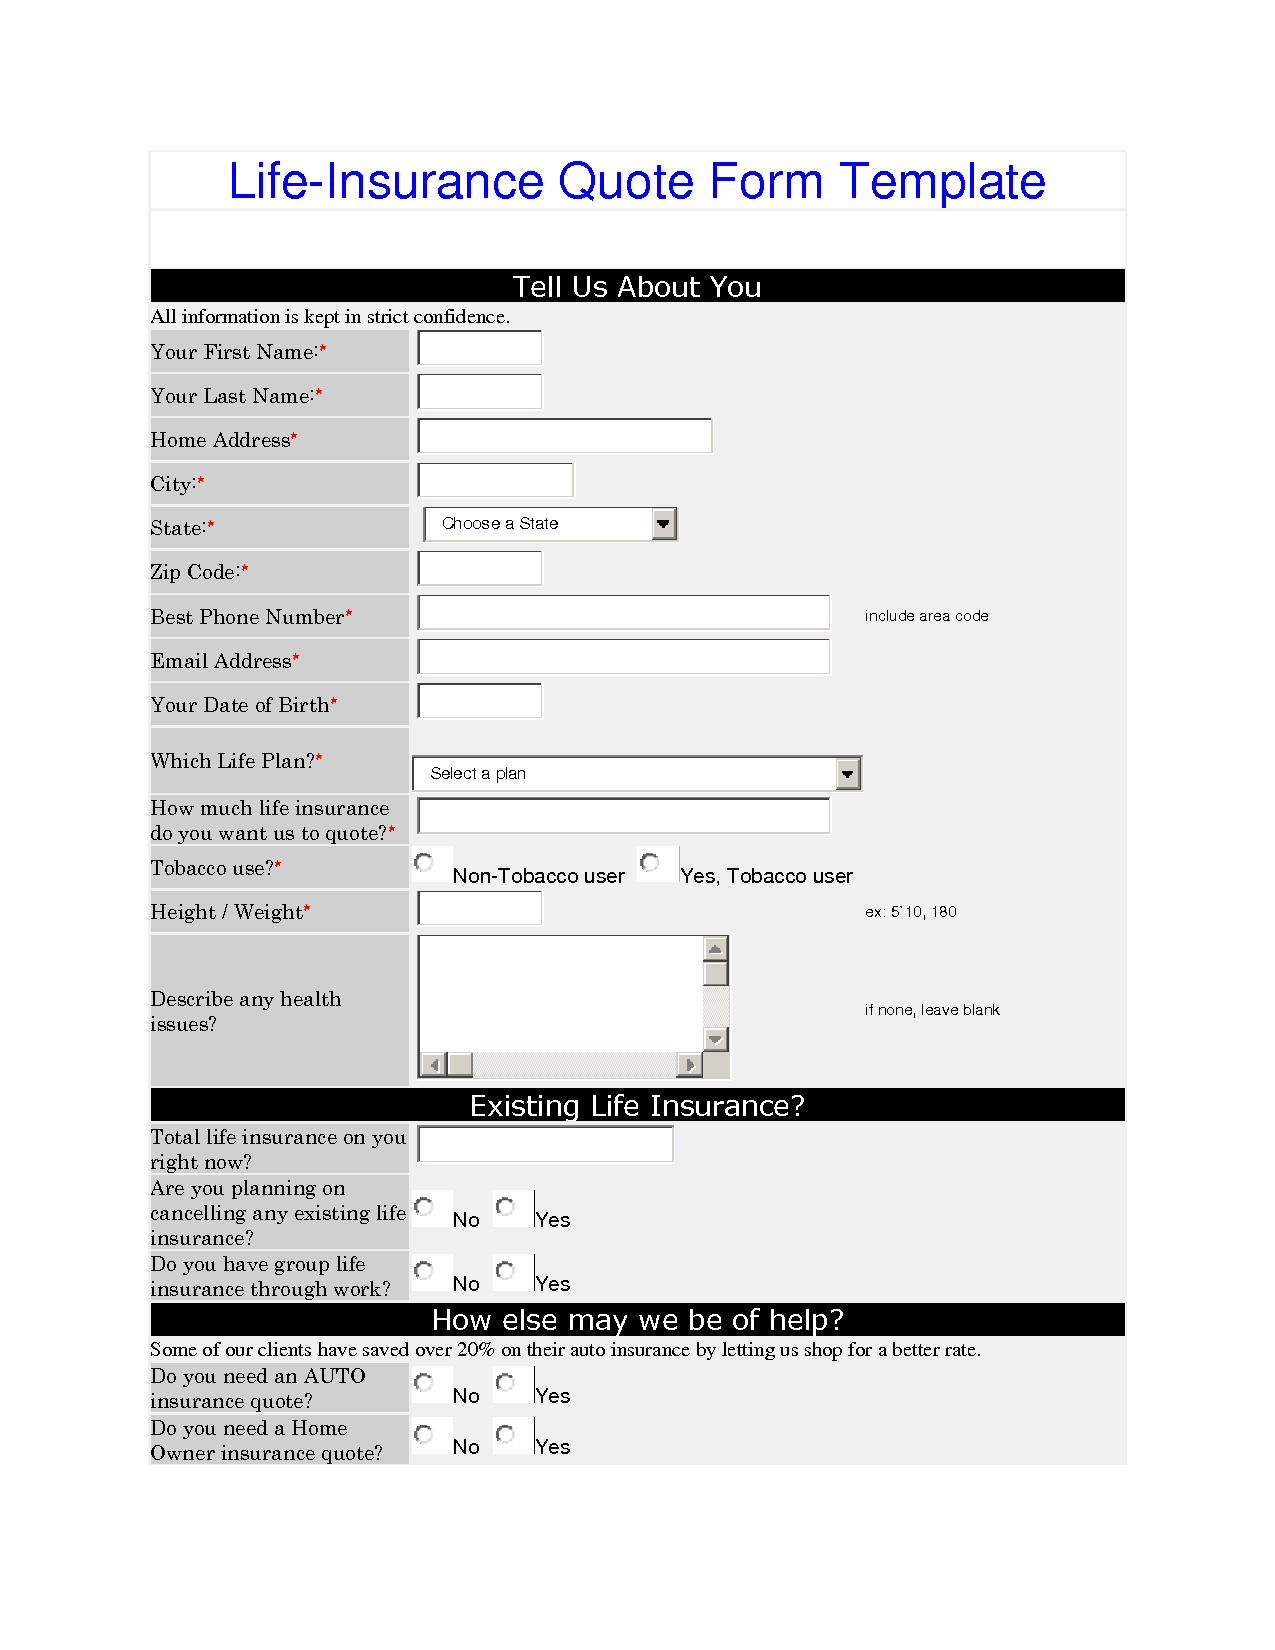 Life Insurance Quote Form 20